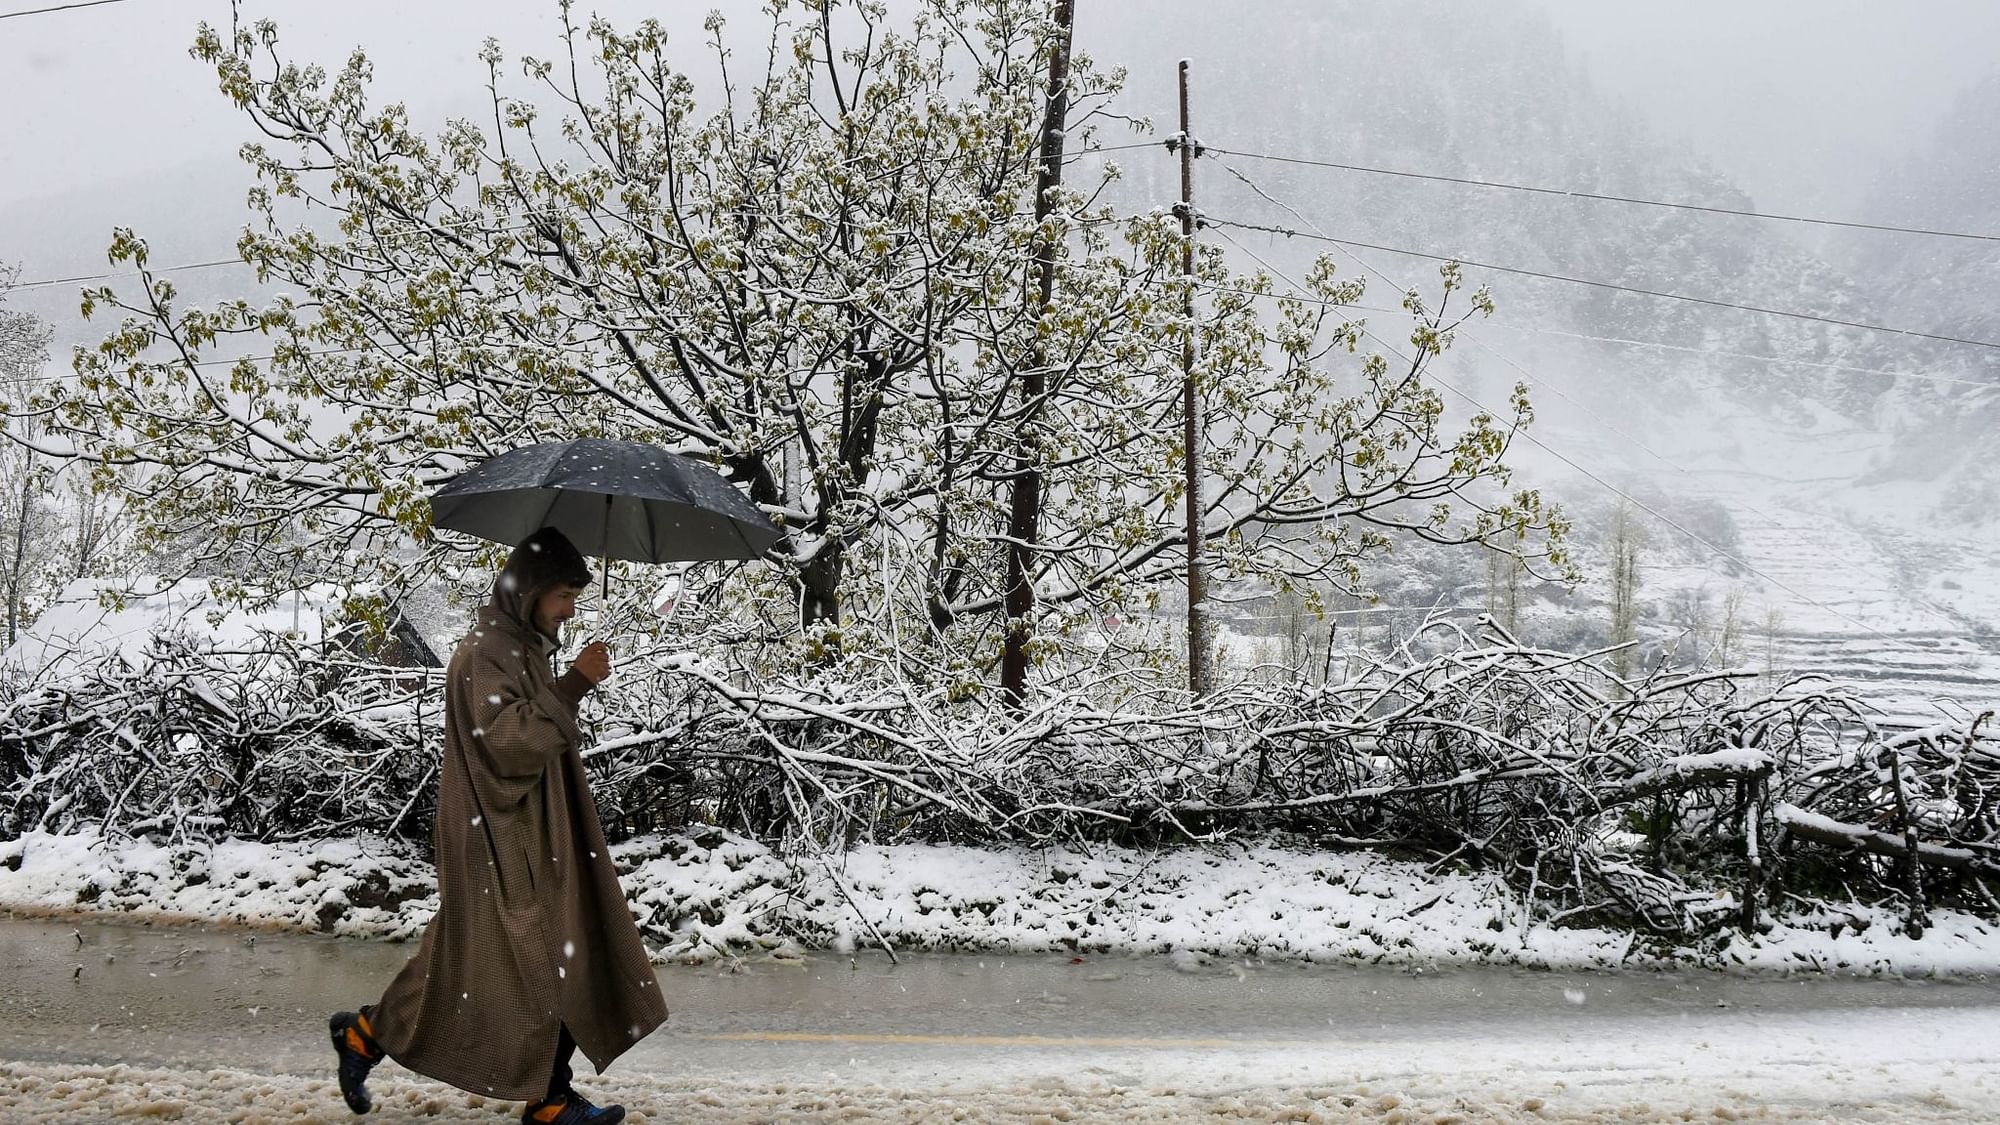 A woman walks with an umbrella in a snowfall near Gangangir in Ganderbal District of Central Kashmir, Thursday, 22 April 2021. Several areas in the higher reaches of Kashmir received fresh snowfall while the plains were lashed by rains.&nbsp;